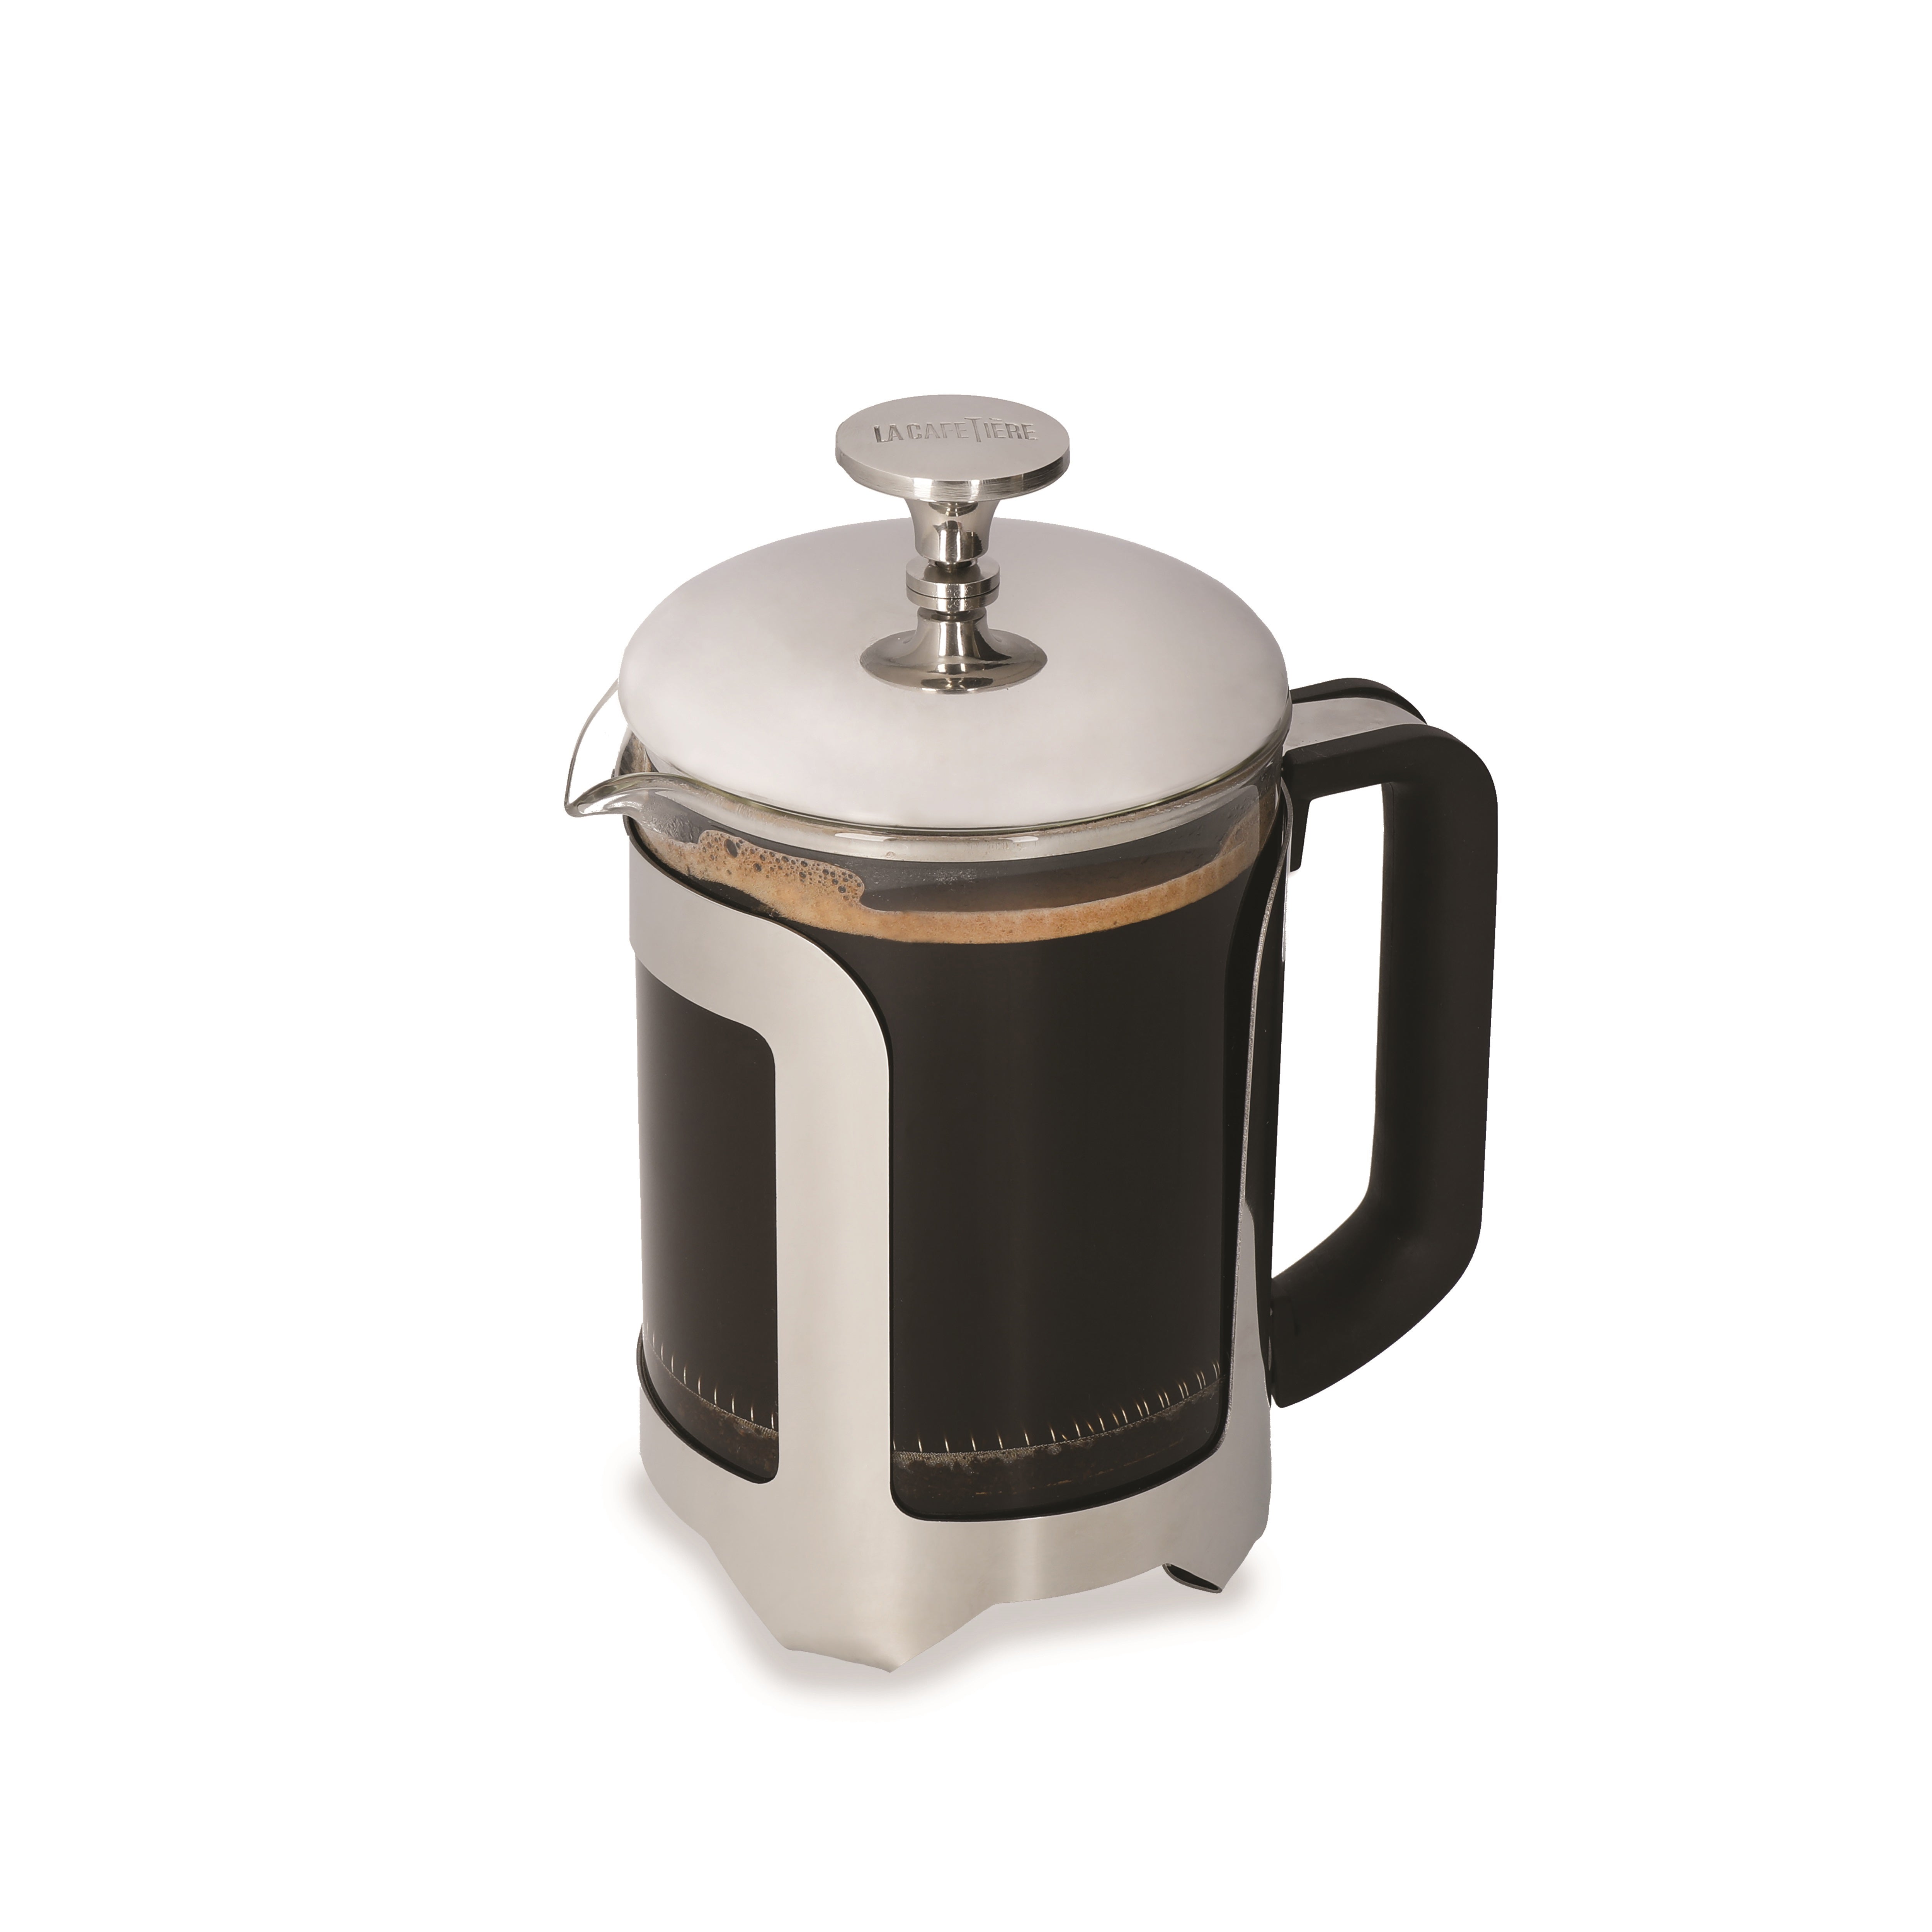 La Cafetiere Roma Stainless Steel 4 Cup Cafetiere